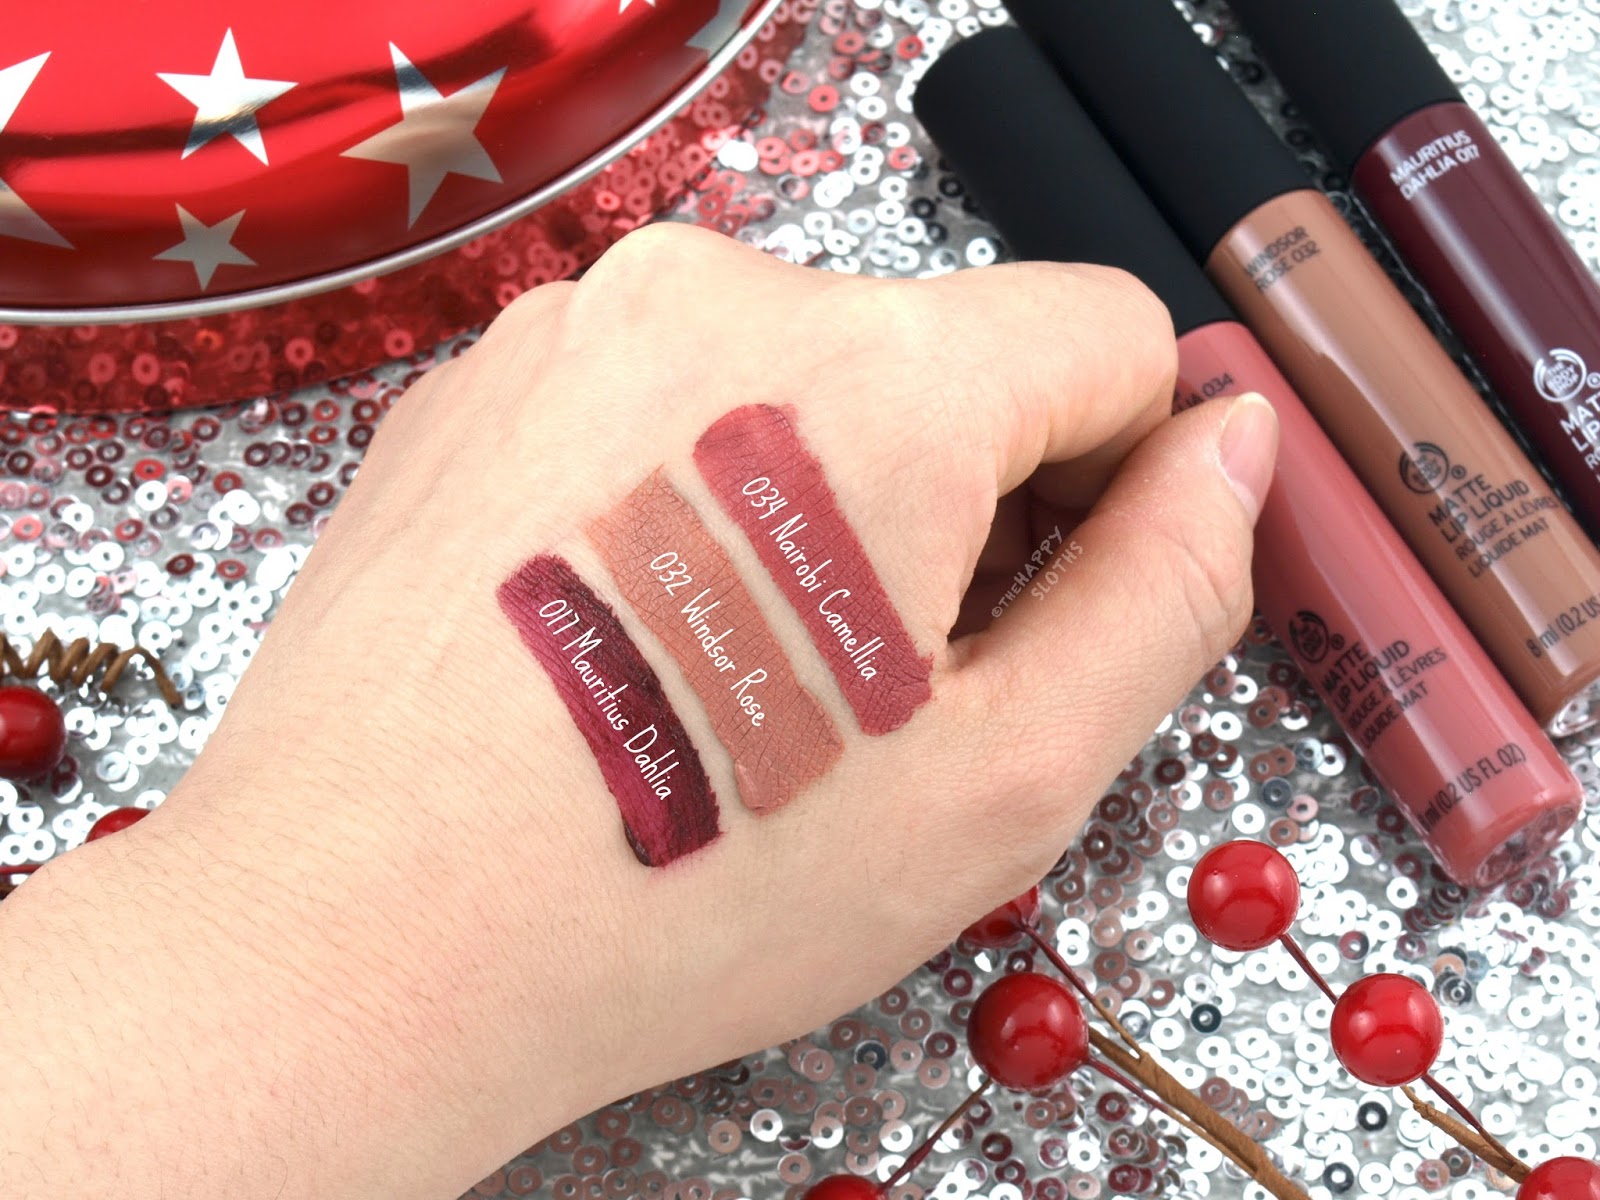 terras Behoort rijk The Body Shop x House of Holland Limited Edition Matte Lip Liquid  Collection: Review and Swatches | The Happy Sloths: Beauty, Makeup, and  Skincare Blog with Reviews and Swatches